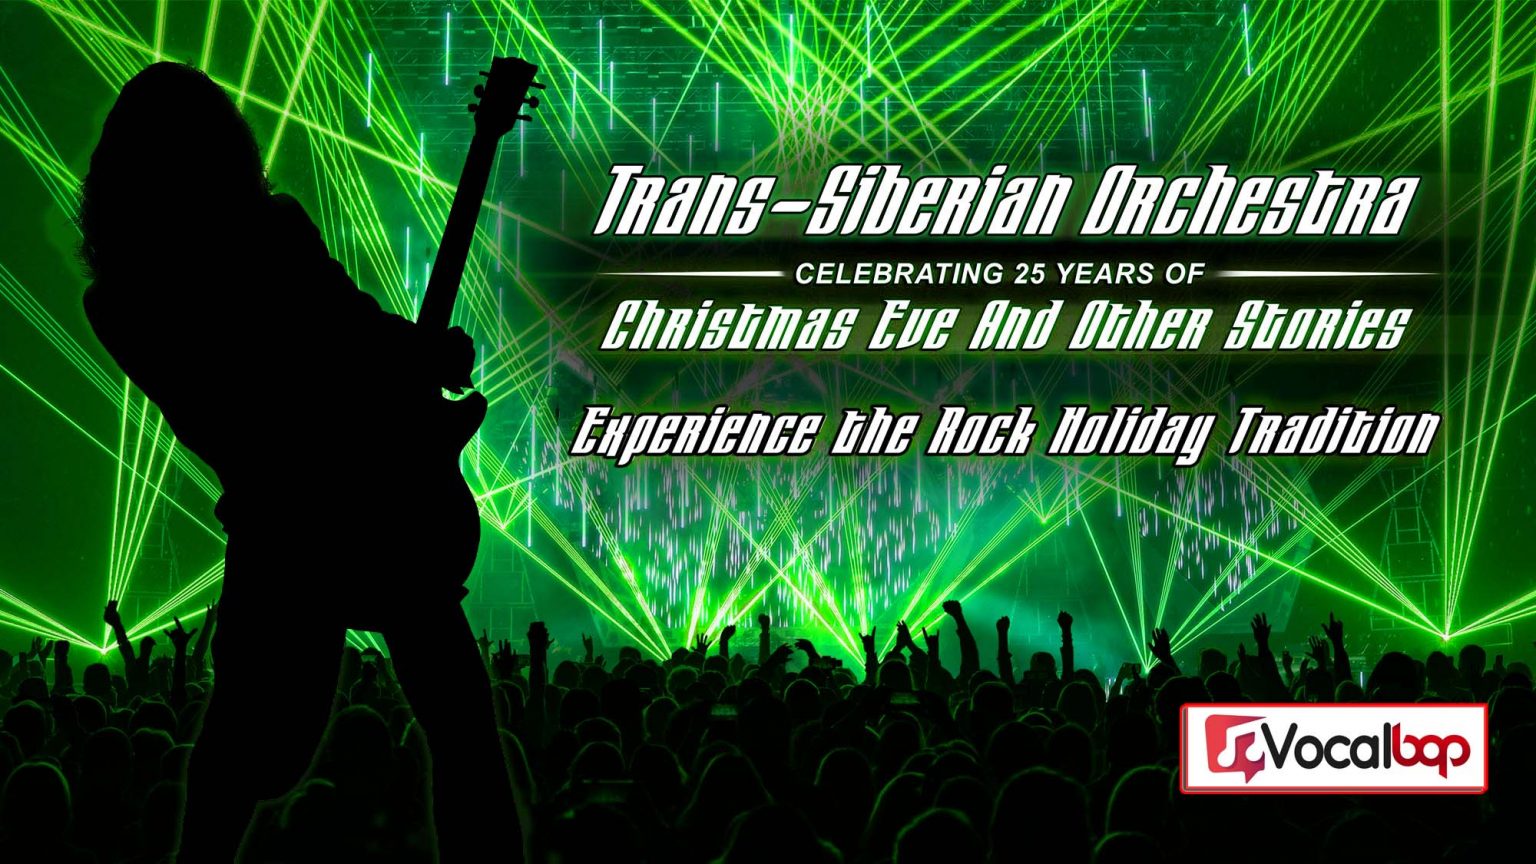 How to Get TransSiberian Orchestra Tour Tickets 2021 2022 Dates